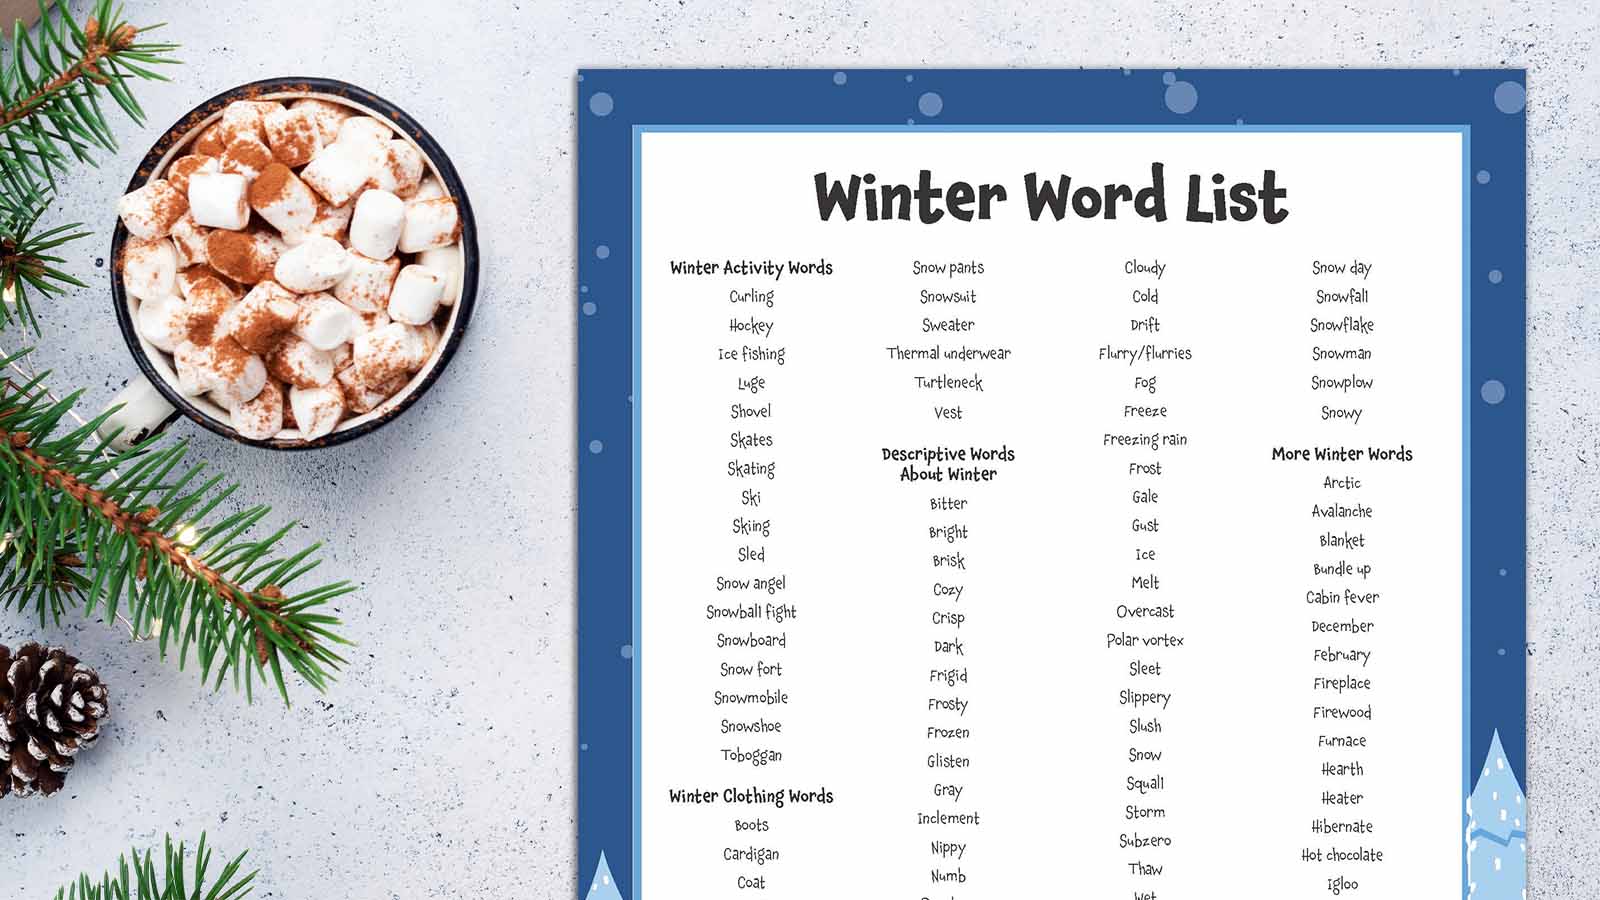 Winter words printable sheet next to a sprig of greenery and a mug of hot cocoa with marshmallows.